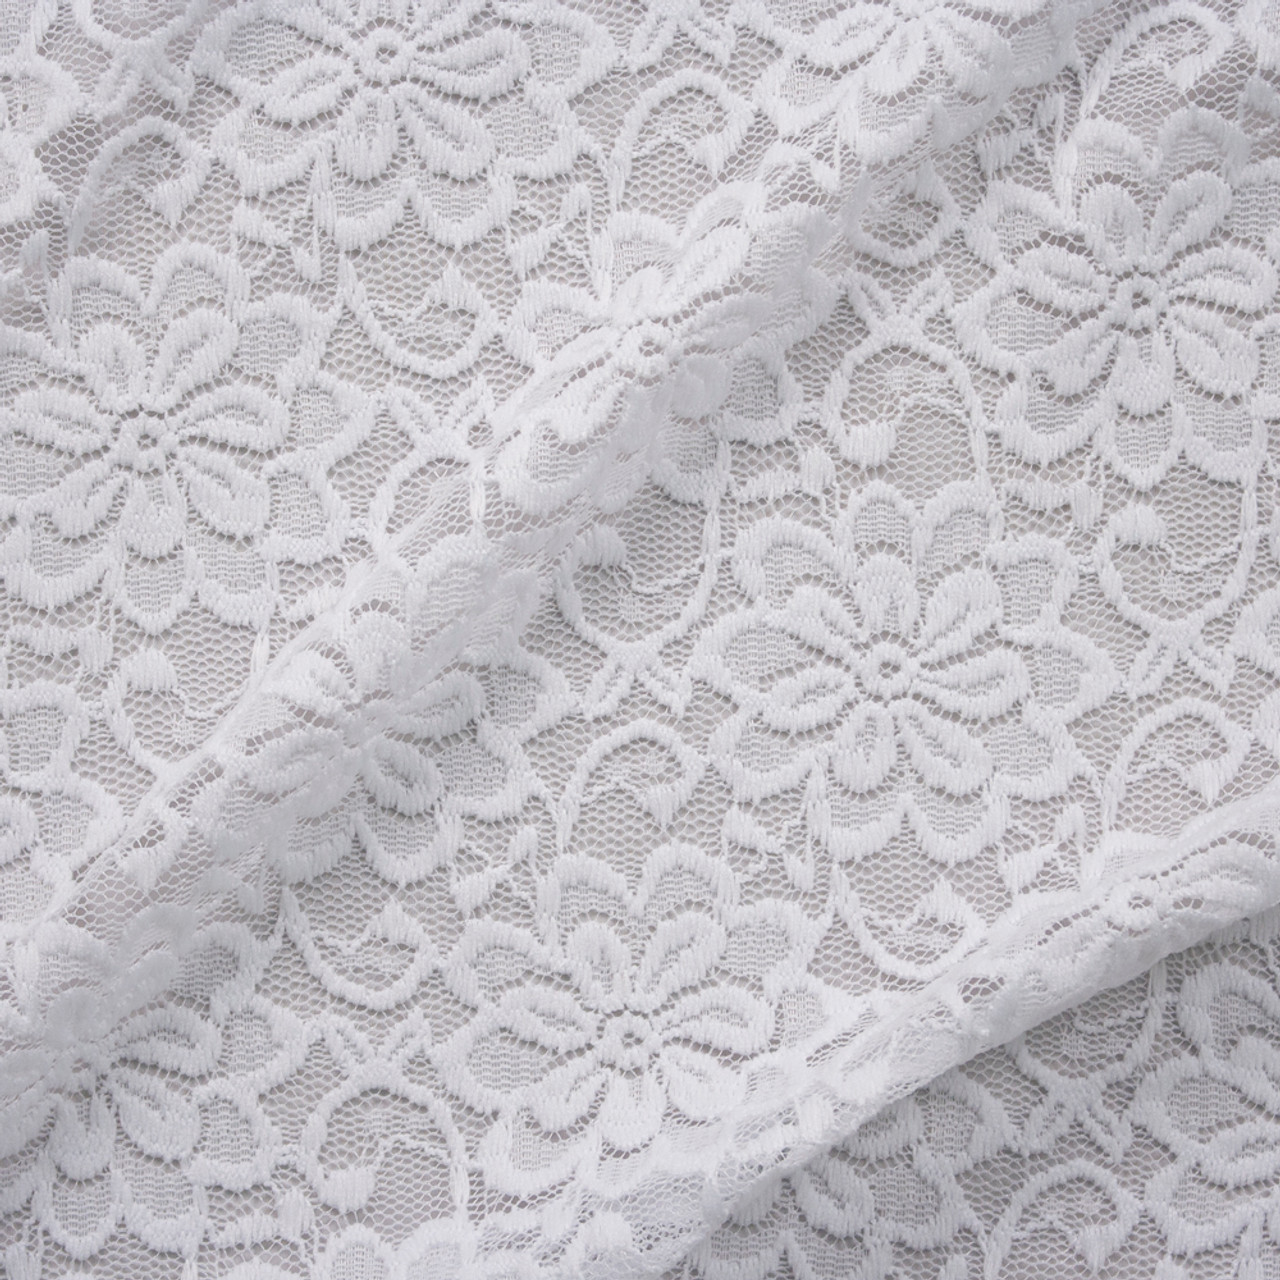 Cali Fabrics White Daisy Floral Stretch Lace Fabric by the Yard